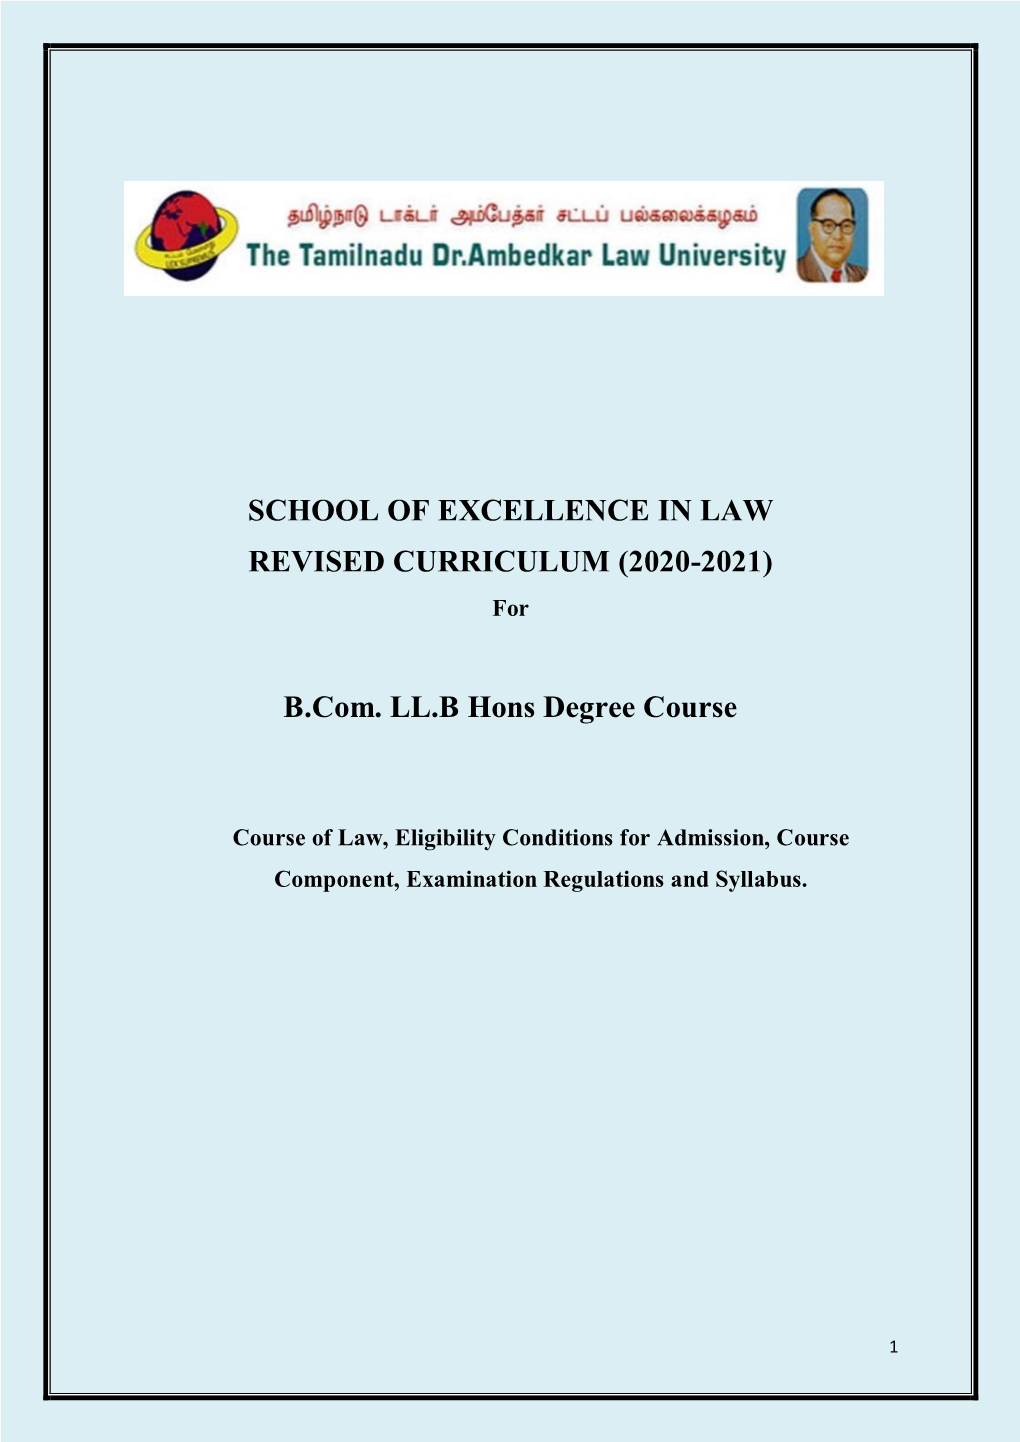 SCHOOL of EXCELLENCE in LAW REVISED CURRICULUM (2020-2021) B.Com. LL.B Hons Degree Course